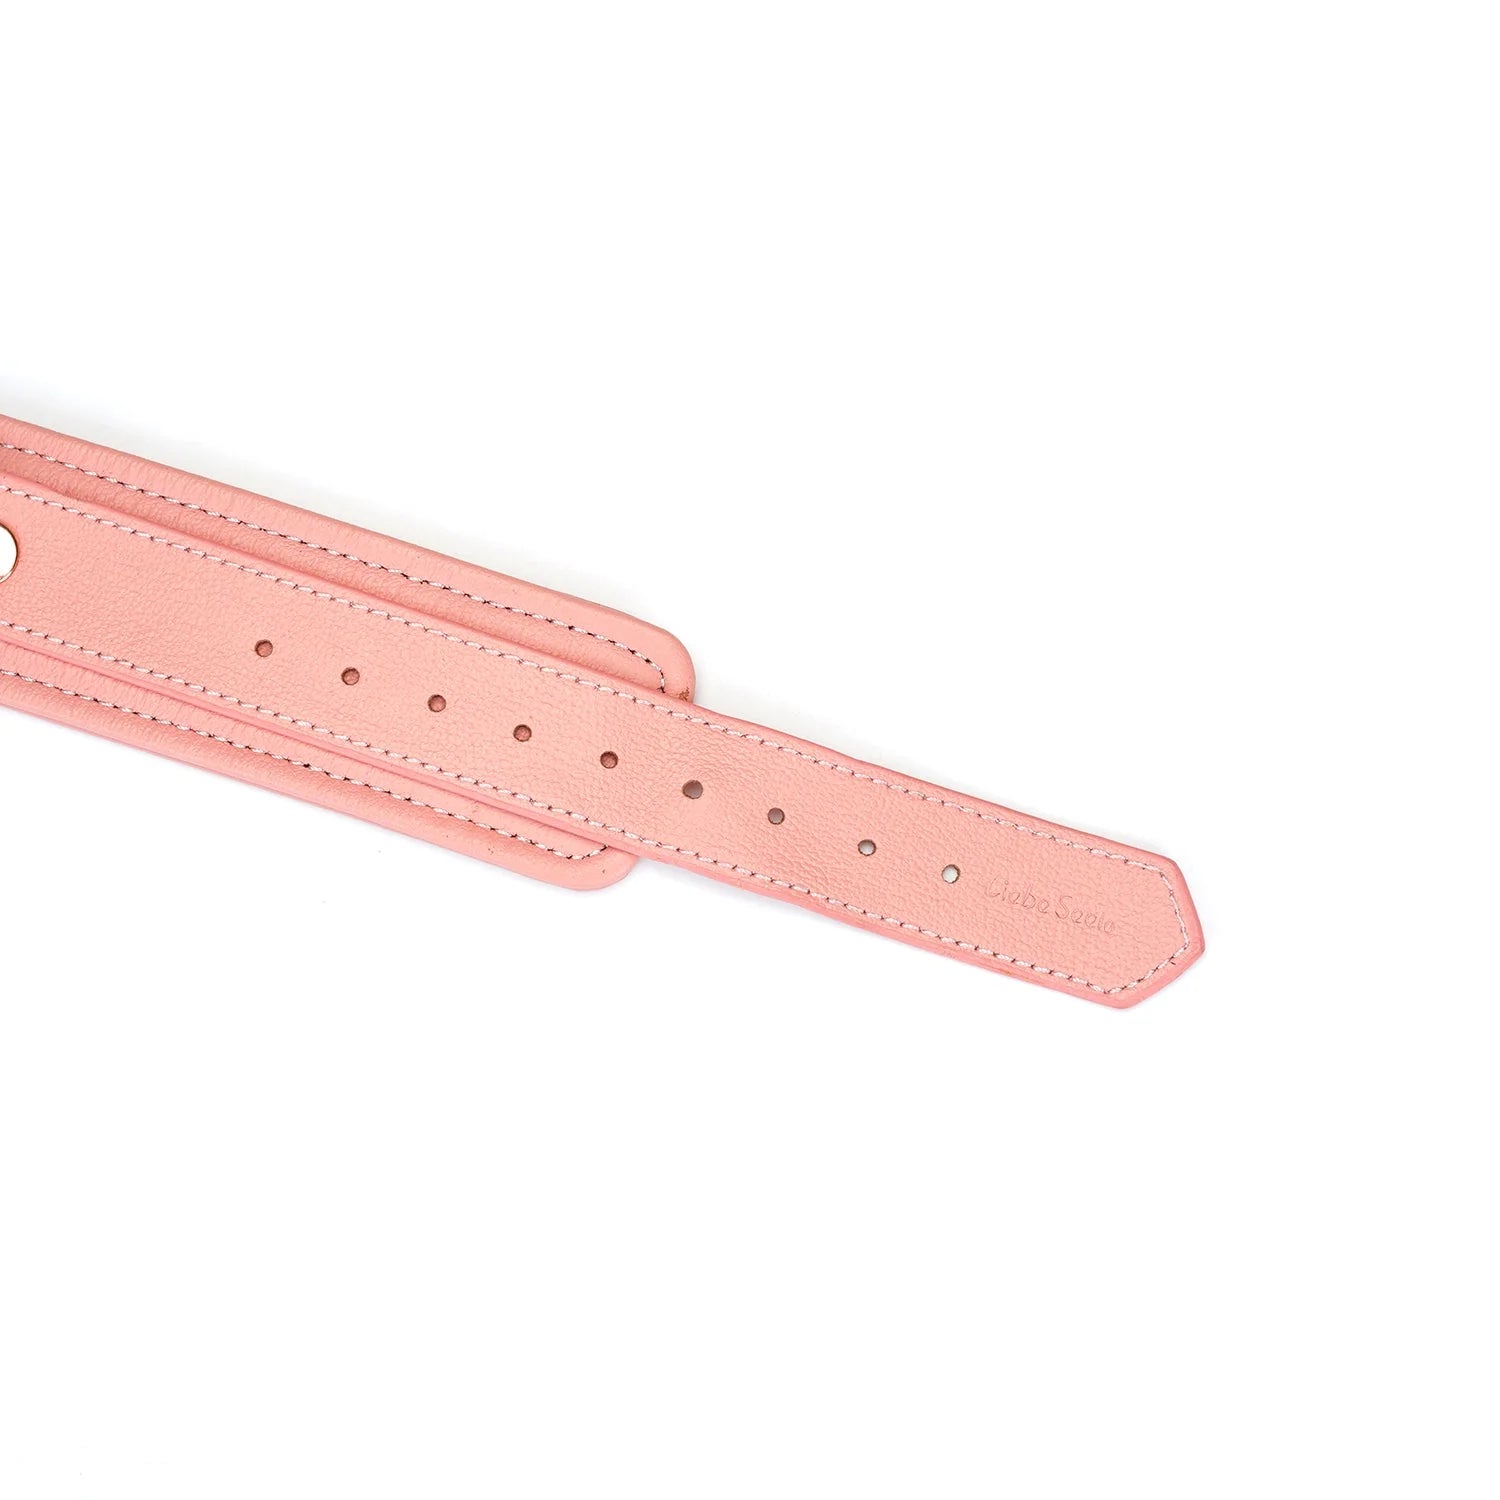  Pink Dream Collar and Leash Kink by Liebe Seele- The Nookie